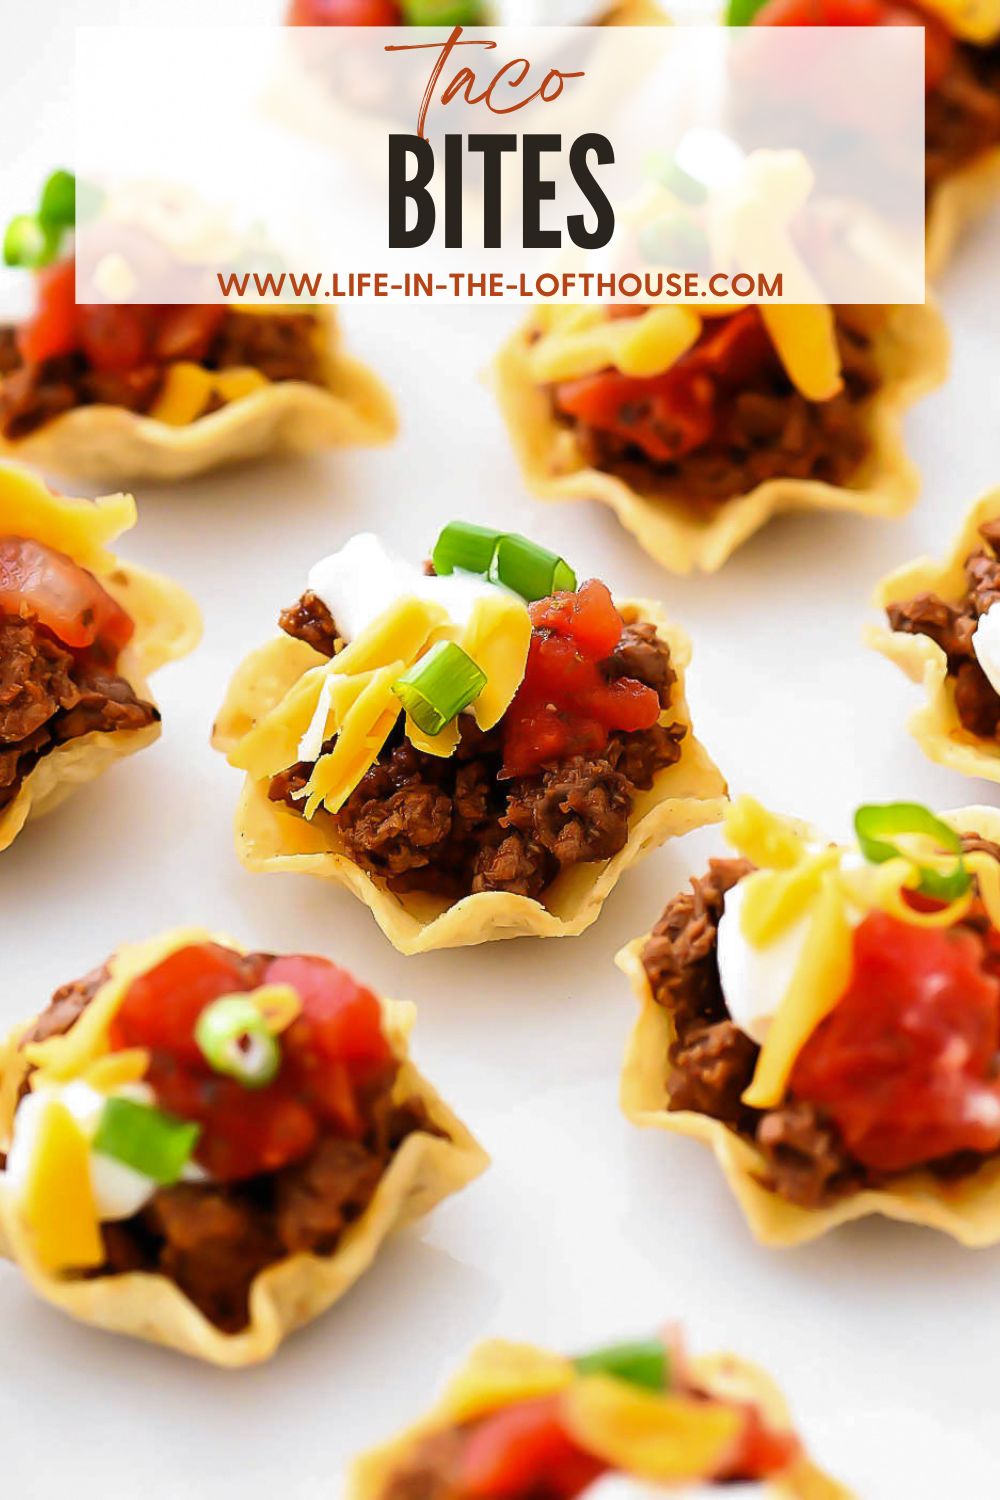 Taco Bites are small tortilla chips topped with taco meat and toppings.